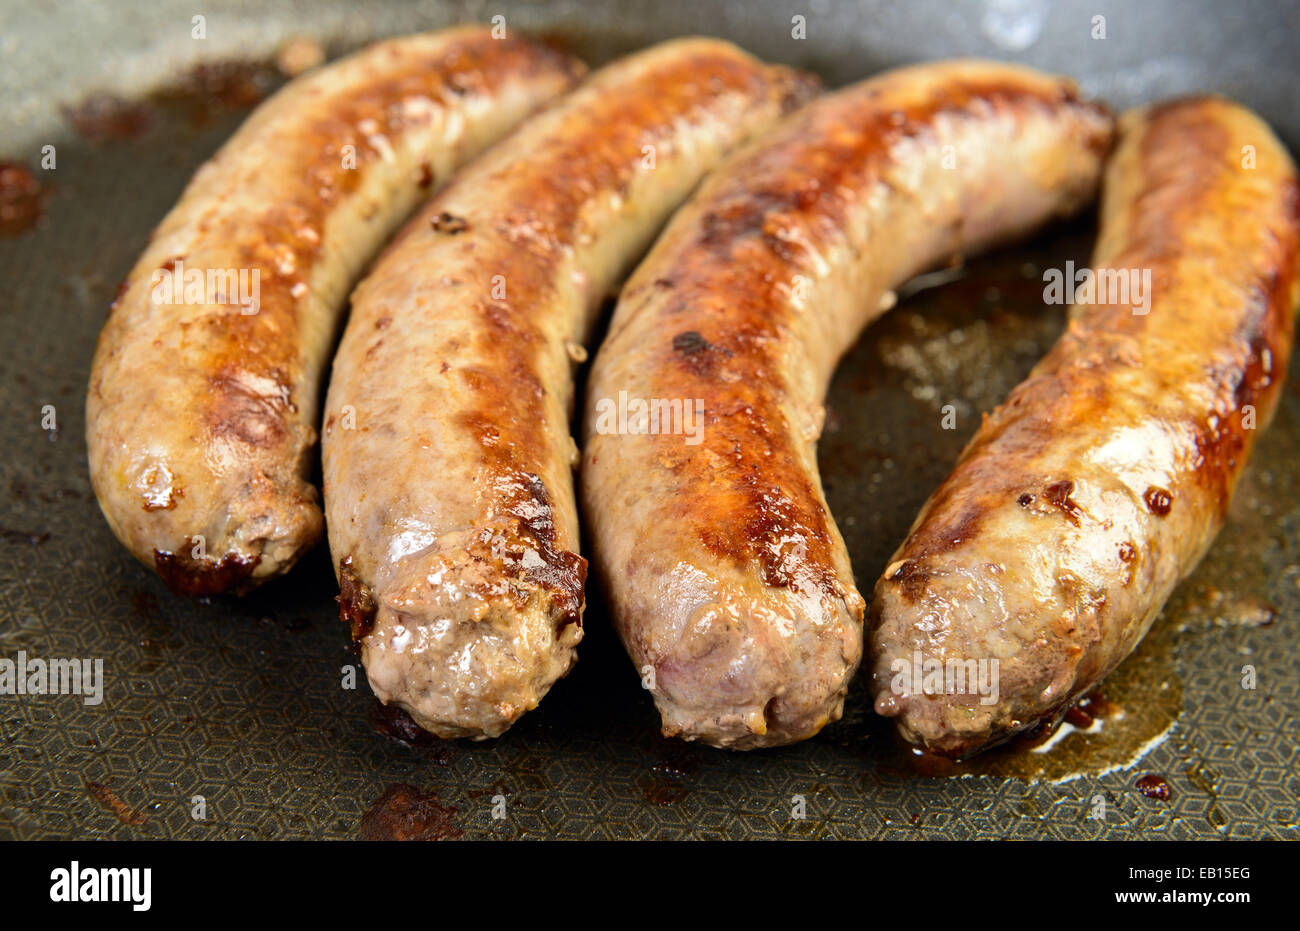 Cooked pork sausage in pan Stock Photo